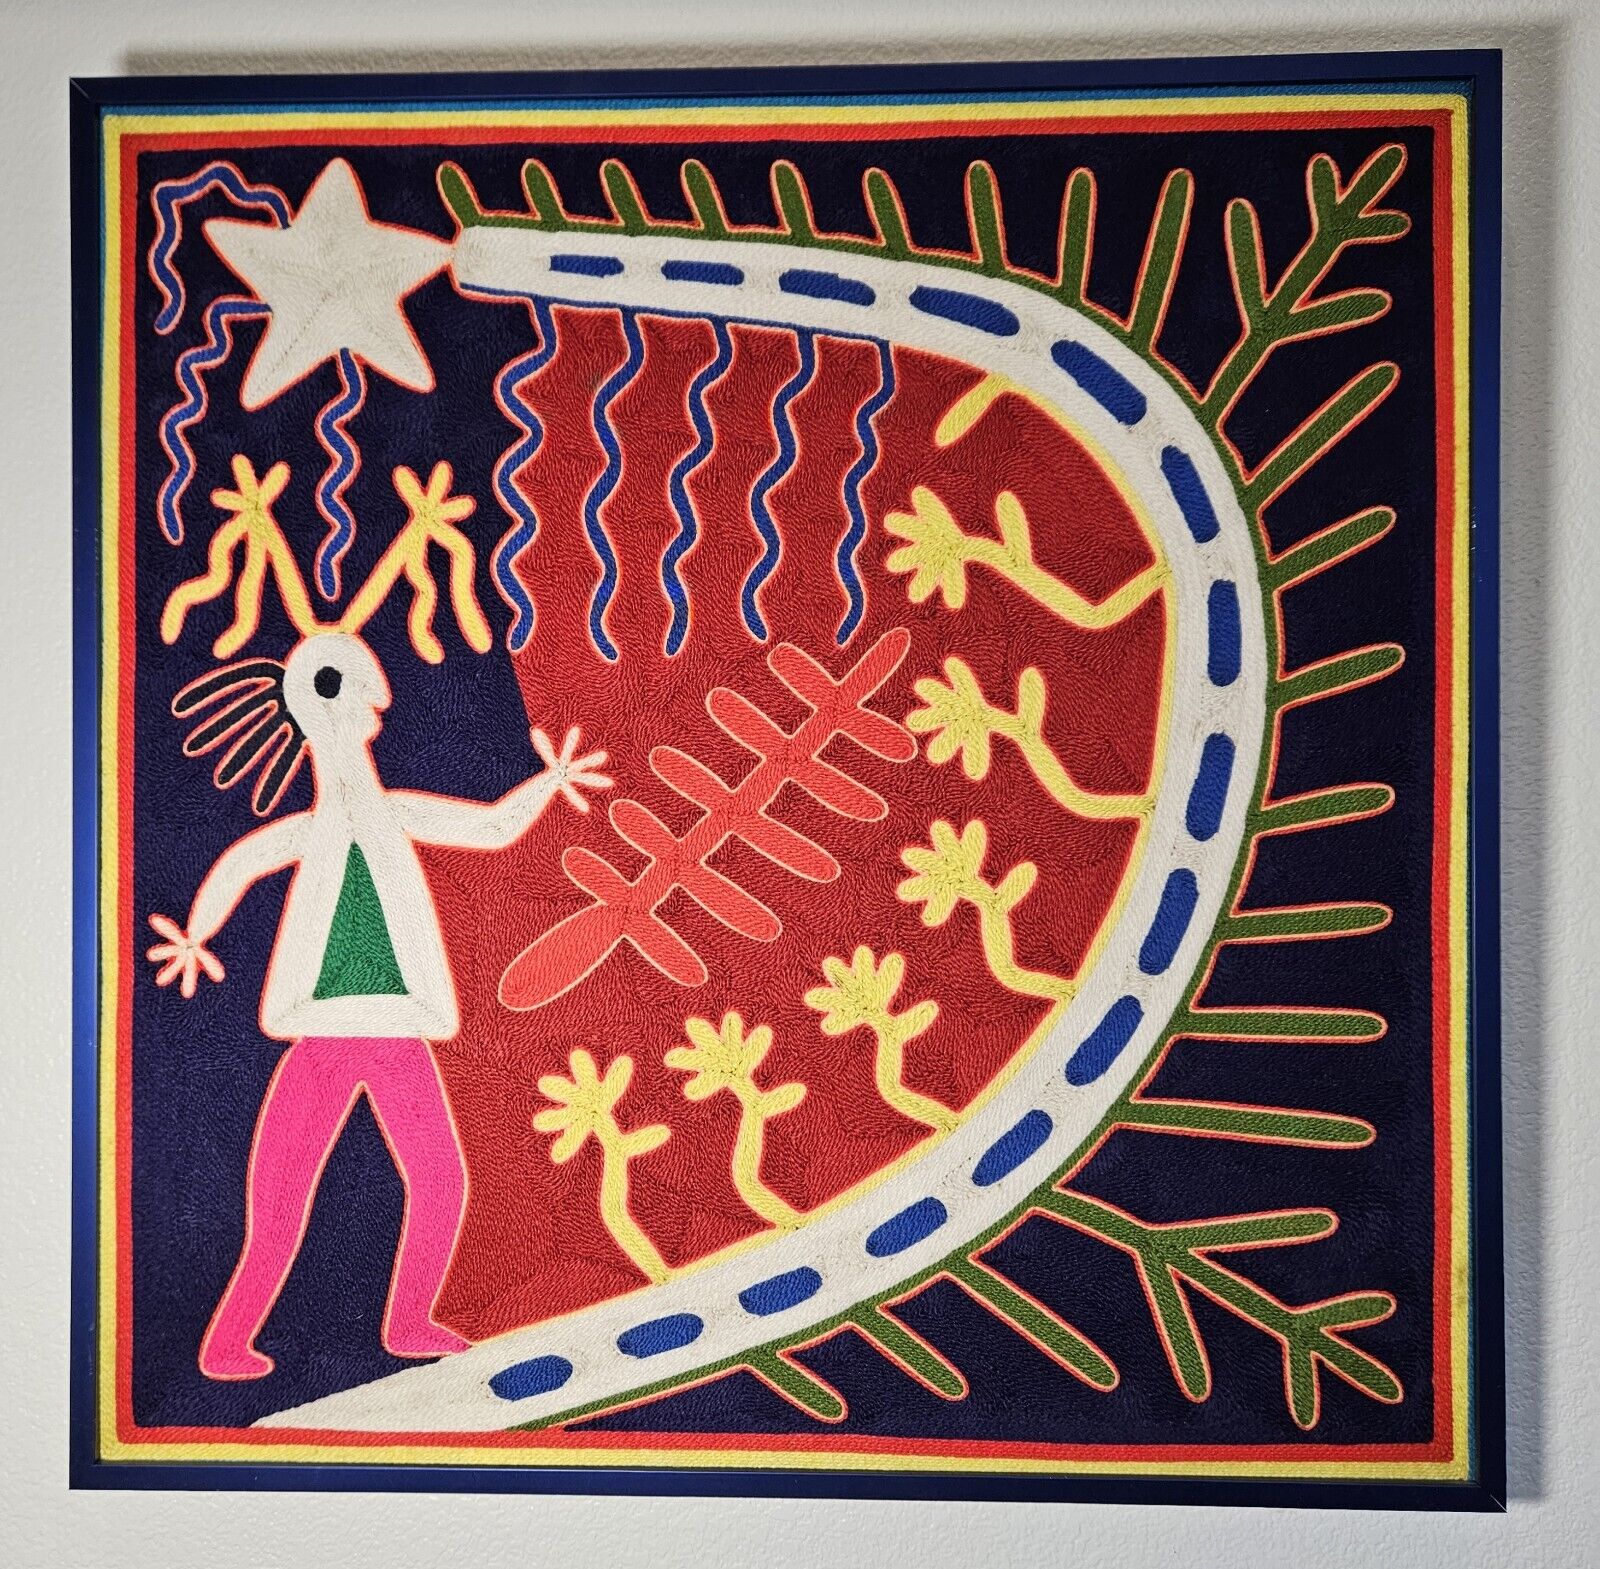 Wow Old Mexican Art Vintage Yarn Painting Huichol Ethnographic Deer & Symbols 